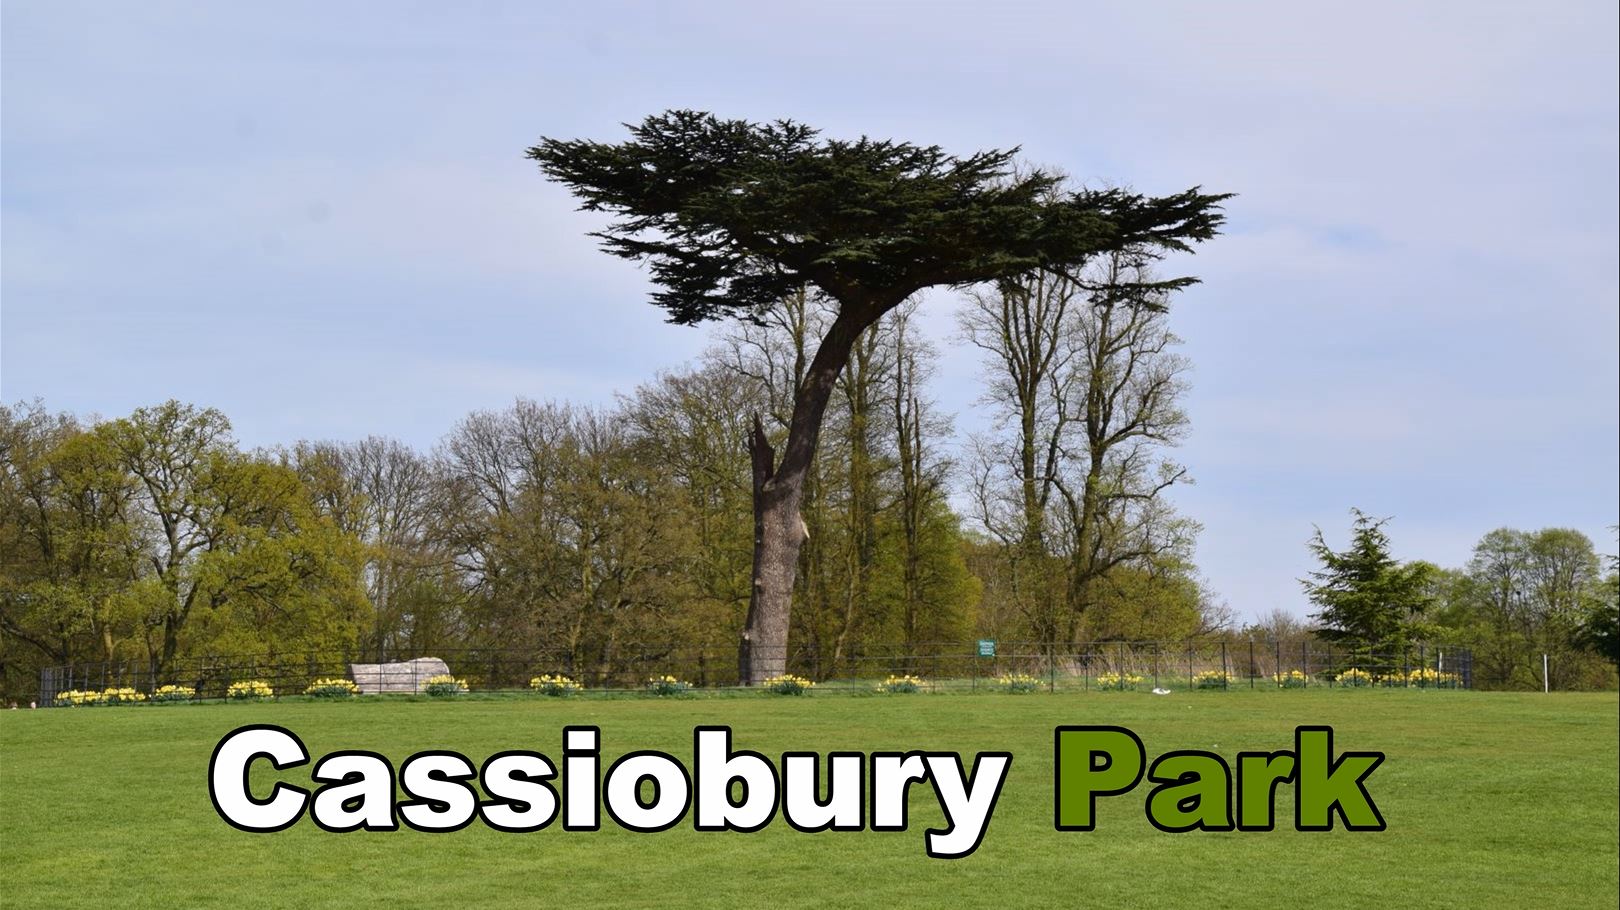 Cassiobury Restoration Project recognised for bringing Park's history back to life